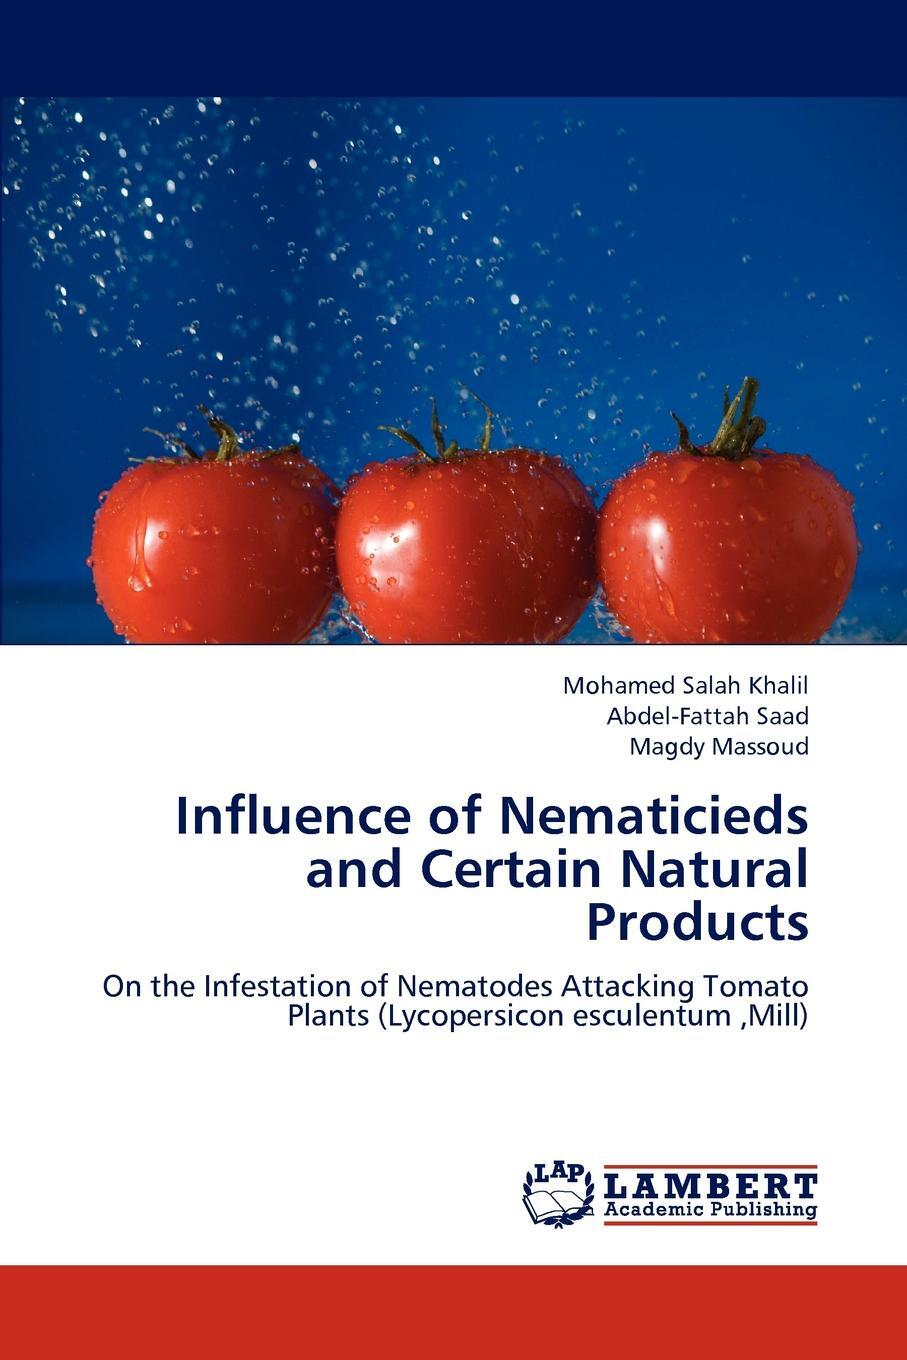 фото Influence of Nematicieds and Certain Natural Products